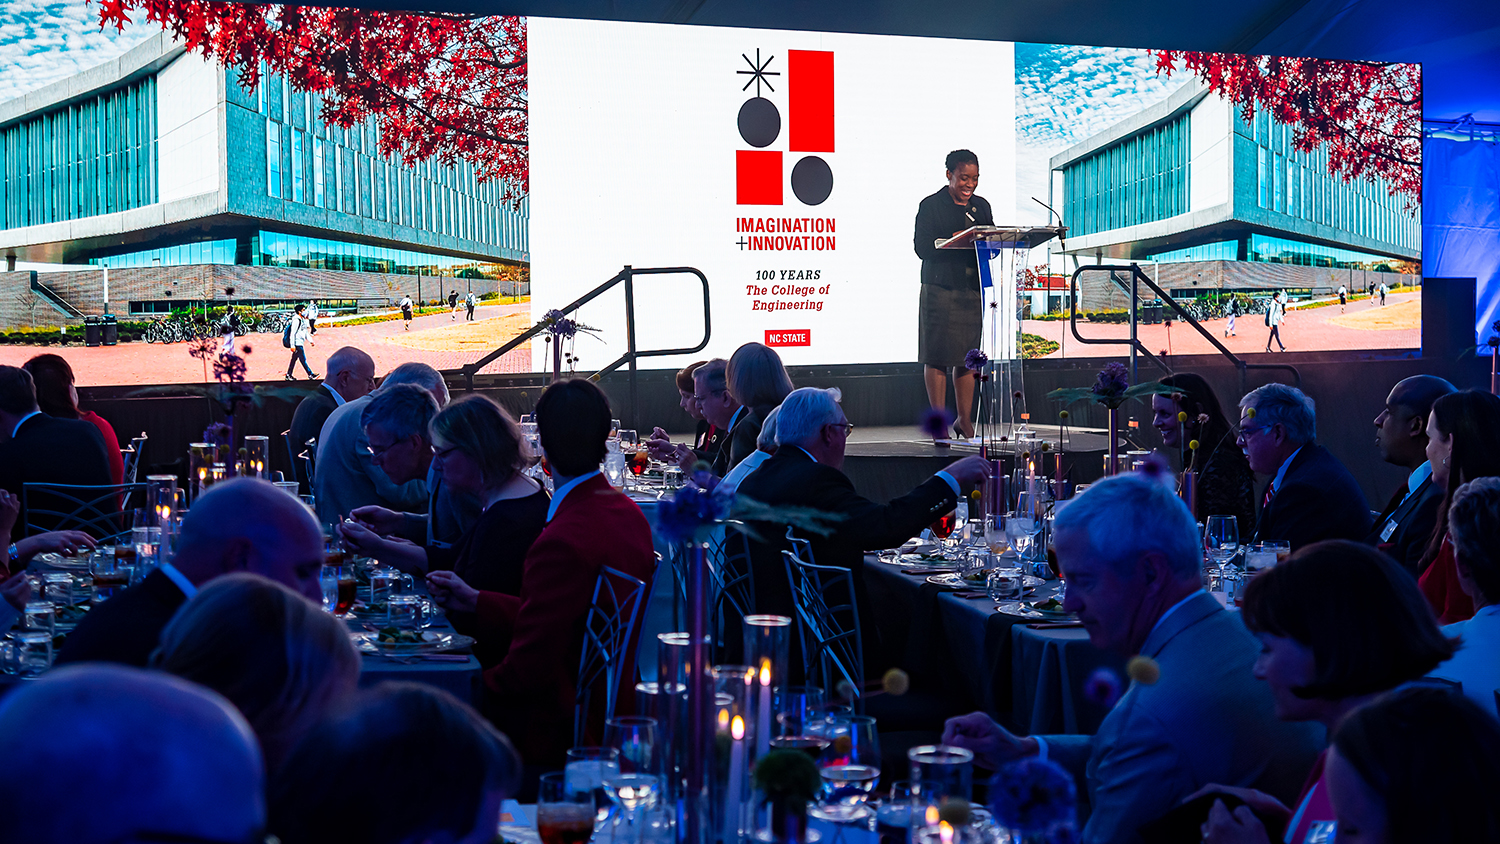 President Deborah B. Young, CE ‘77, speaks to attendees during the College of Engineering 100th anninversary celebration in May 2023. A large LED screen is behind her showing an image of Fitts-Woolard Hall and the 100th anniversary logo designed for the College of Engineering.